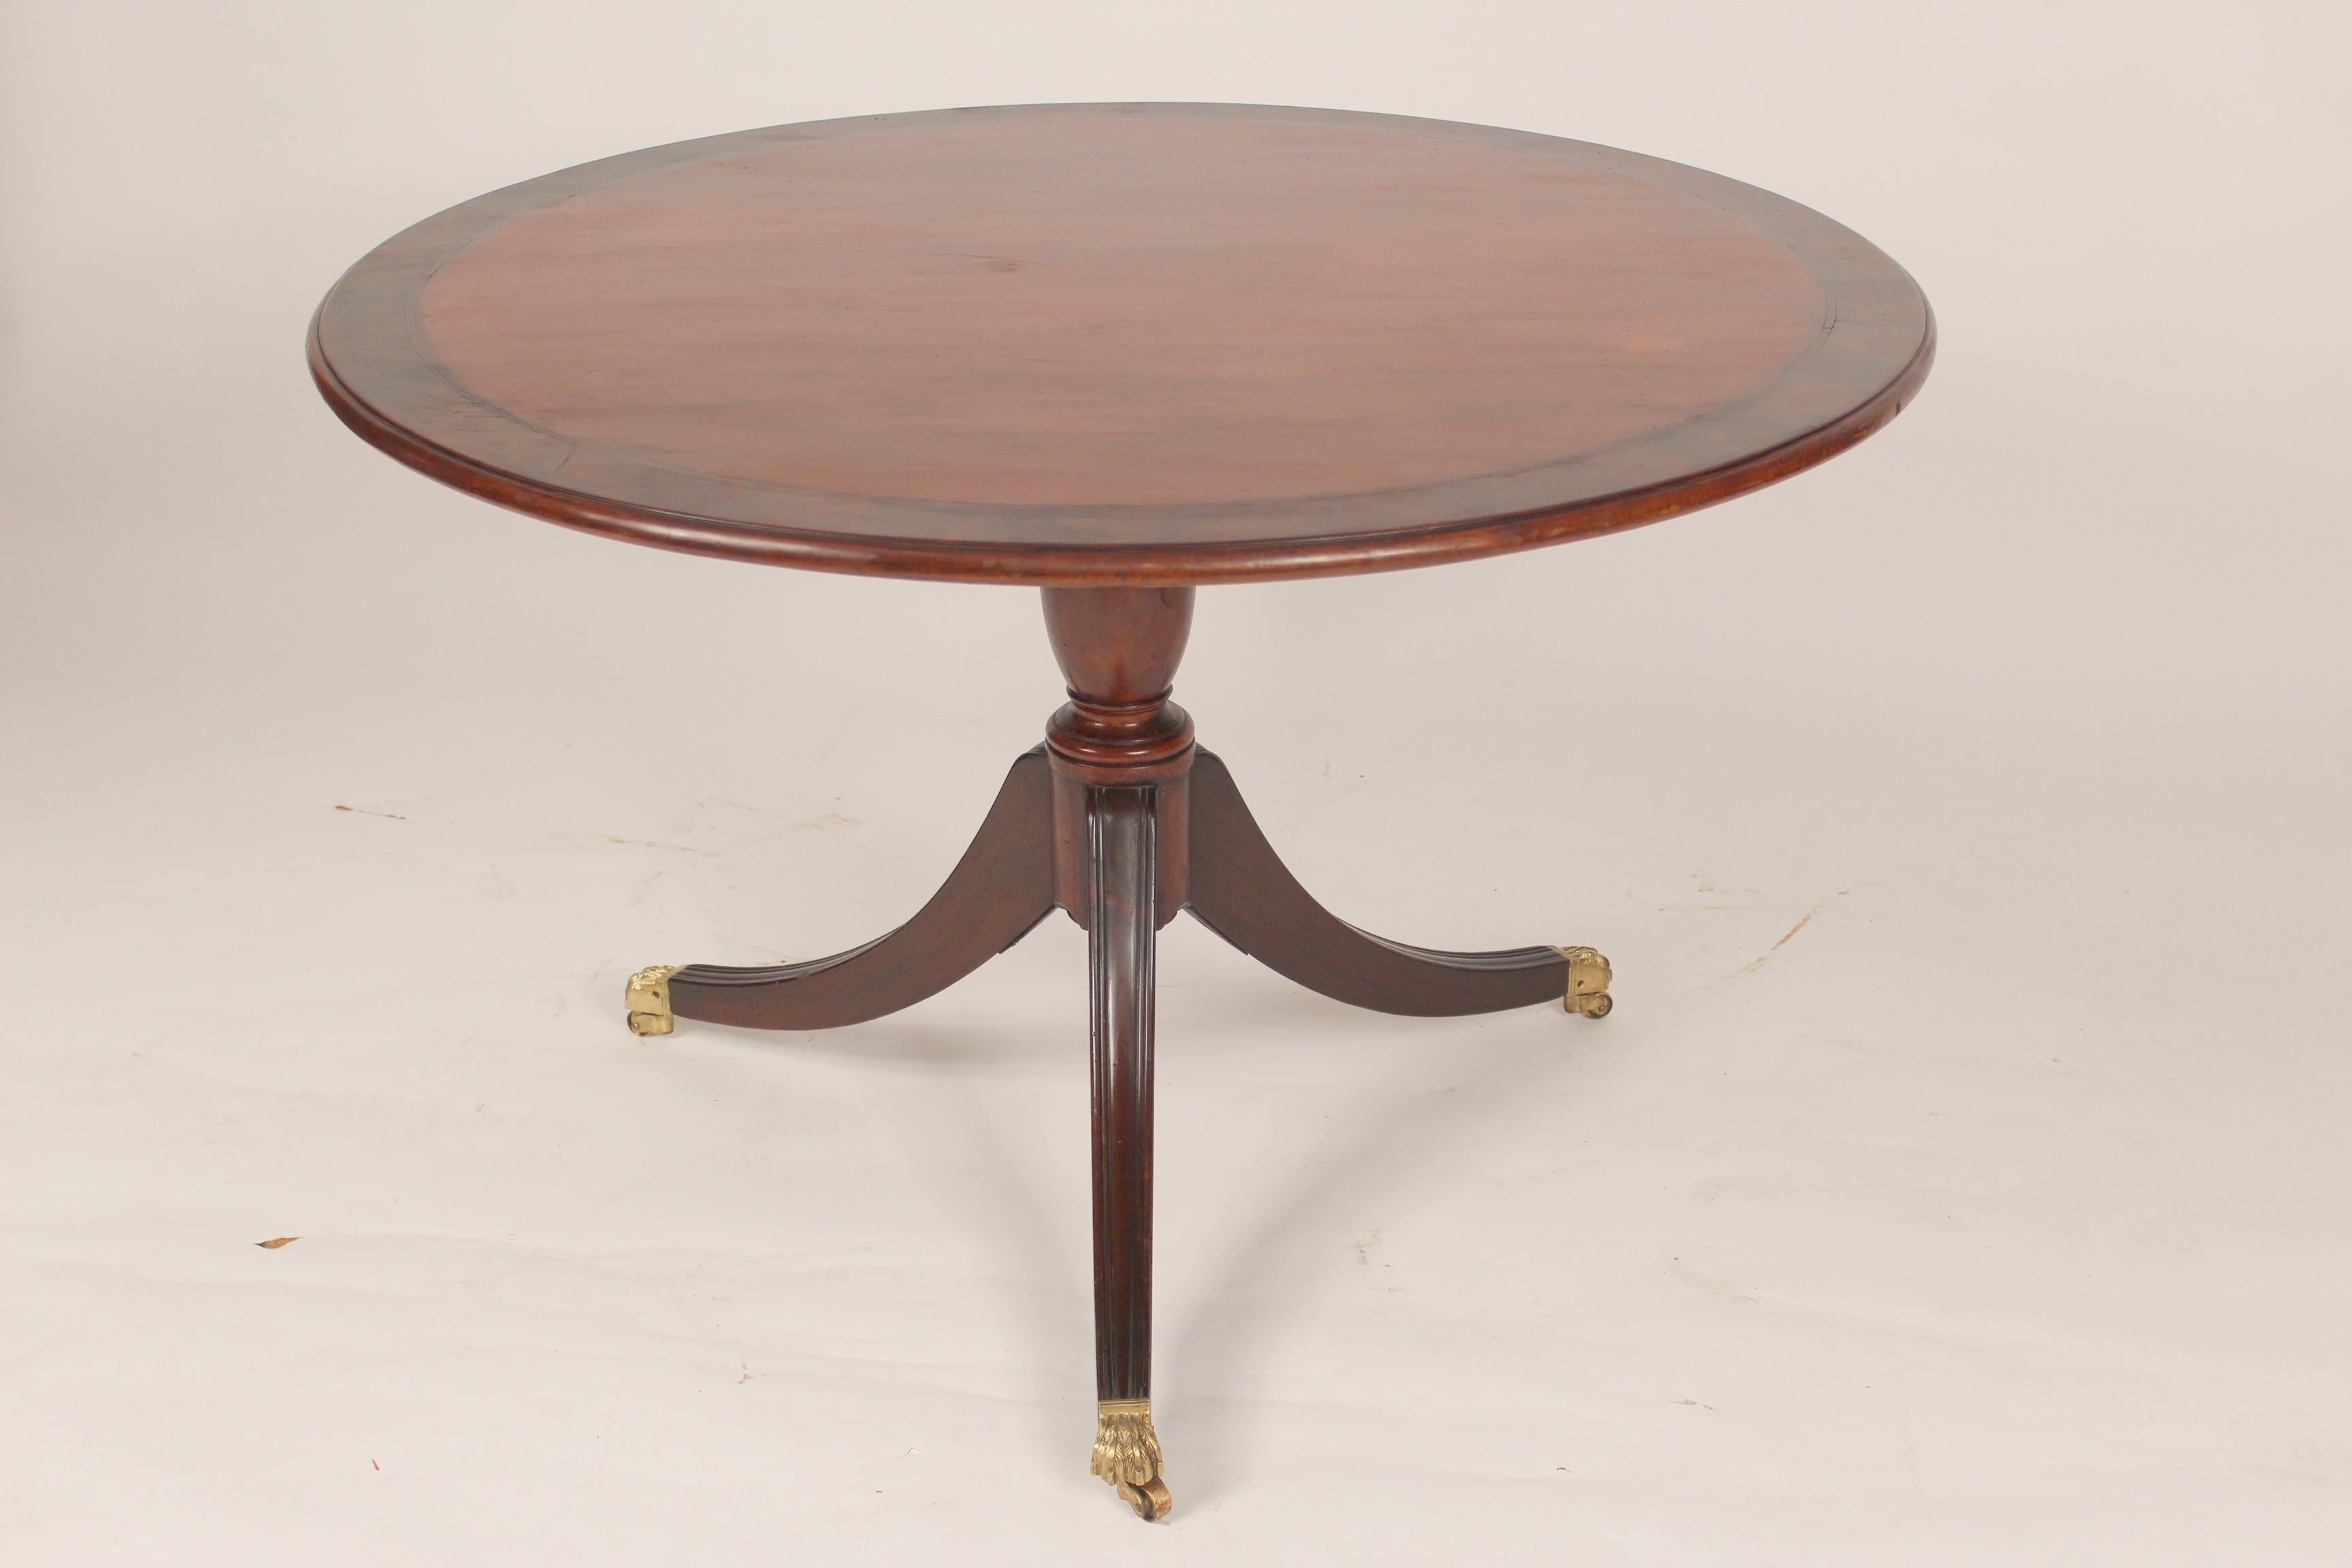 George III style mahogany breakfast / games / center table, circa 1920. This table has nicely figured mahogany with flame mahogany cross banding and brass lion paw feet.